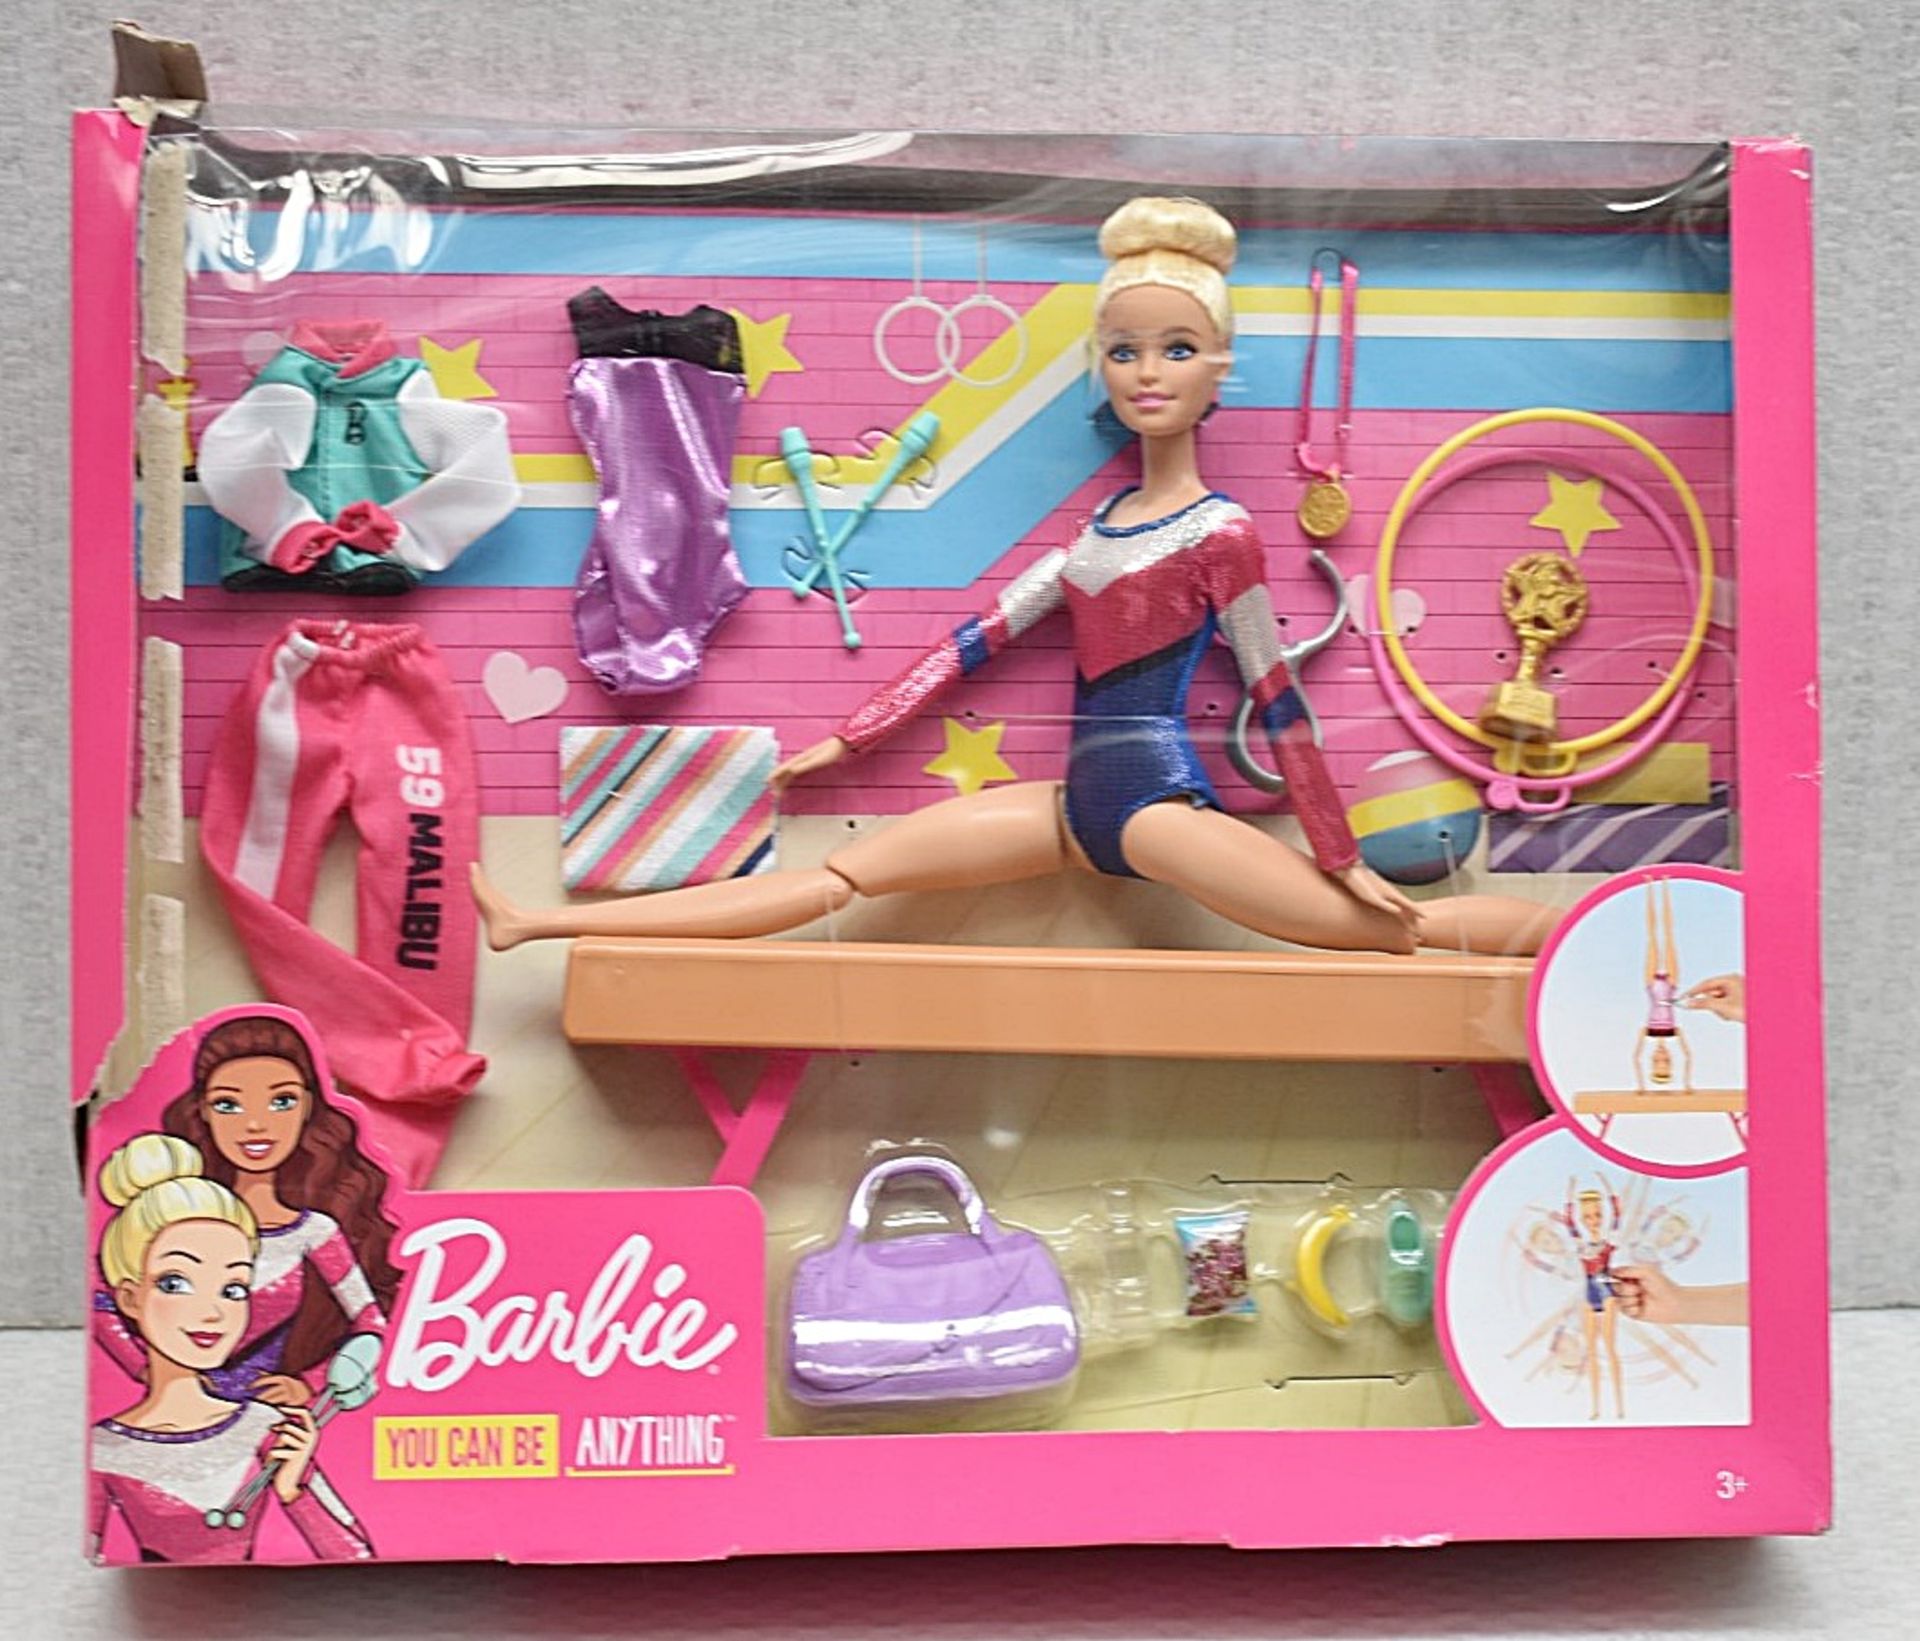 1 x BARBIE Sport Gymnastics Doll and Playset - Unused Boxed Stock - Ref: HAS2311/WH2/C11/02-23-1 -